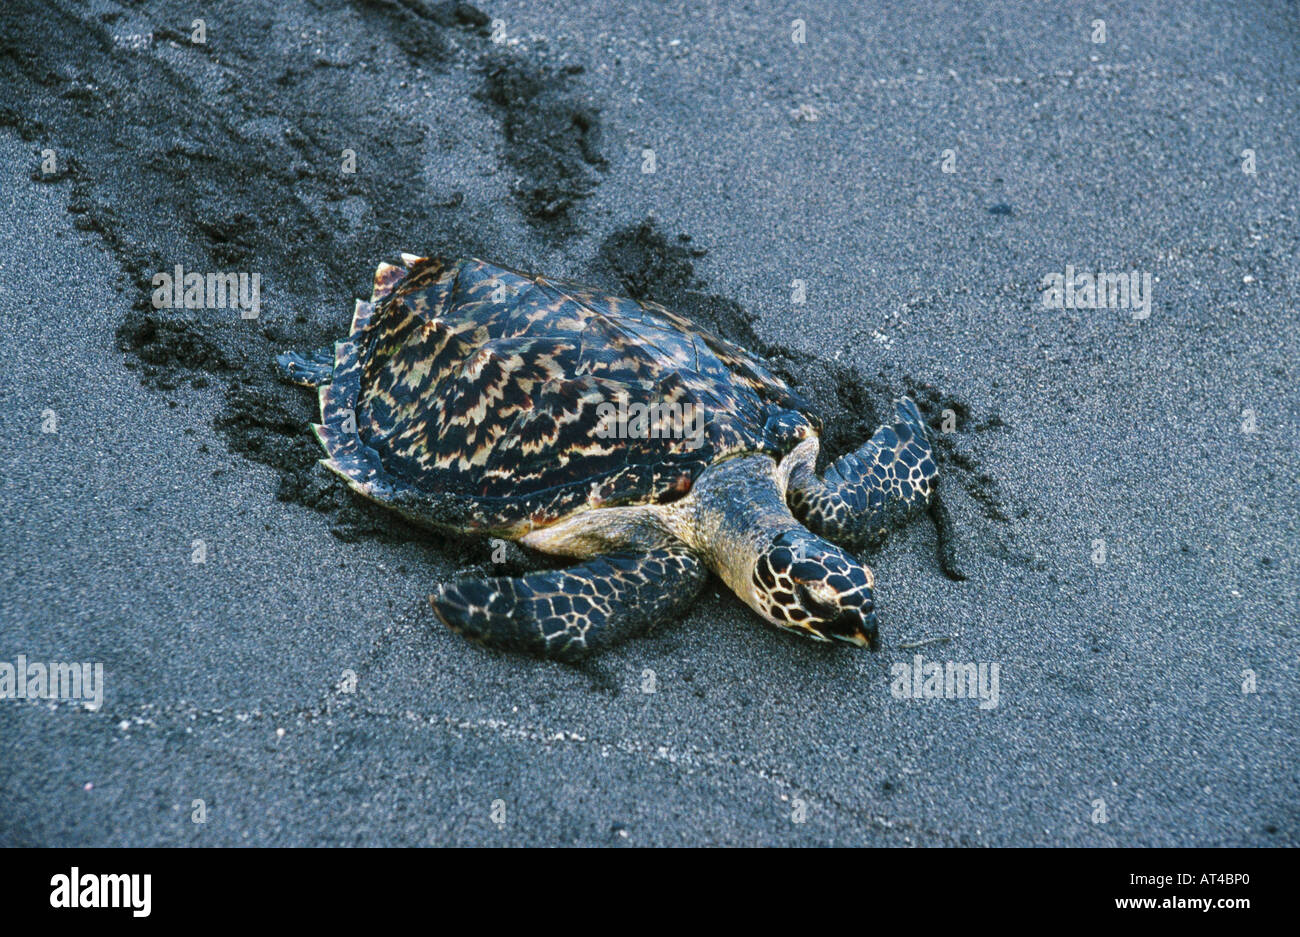 hawksbill turtle, hawksbill sea turtle (Eretmochelys imbricata), young on the way to the ocean Stock Photo